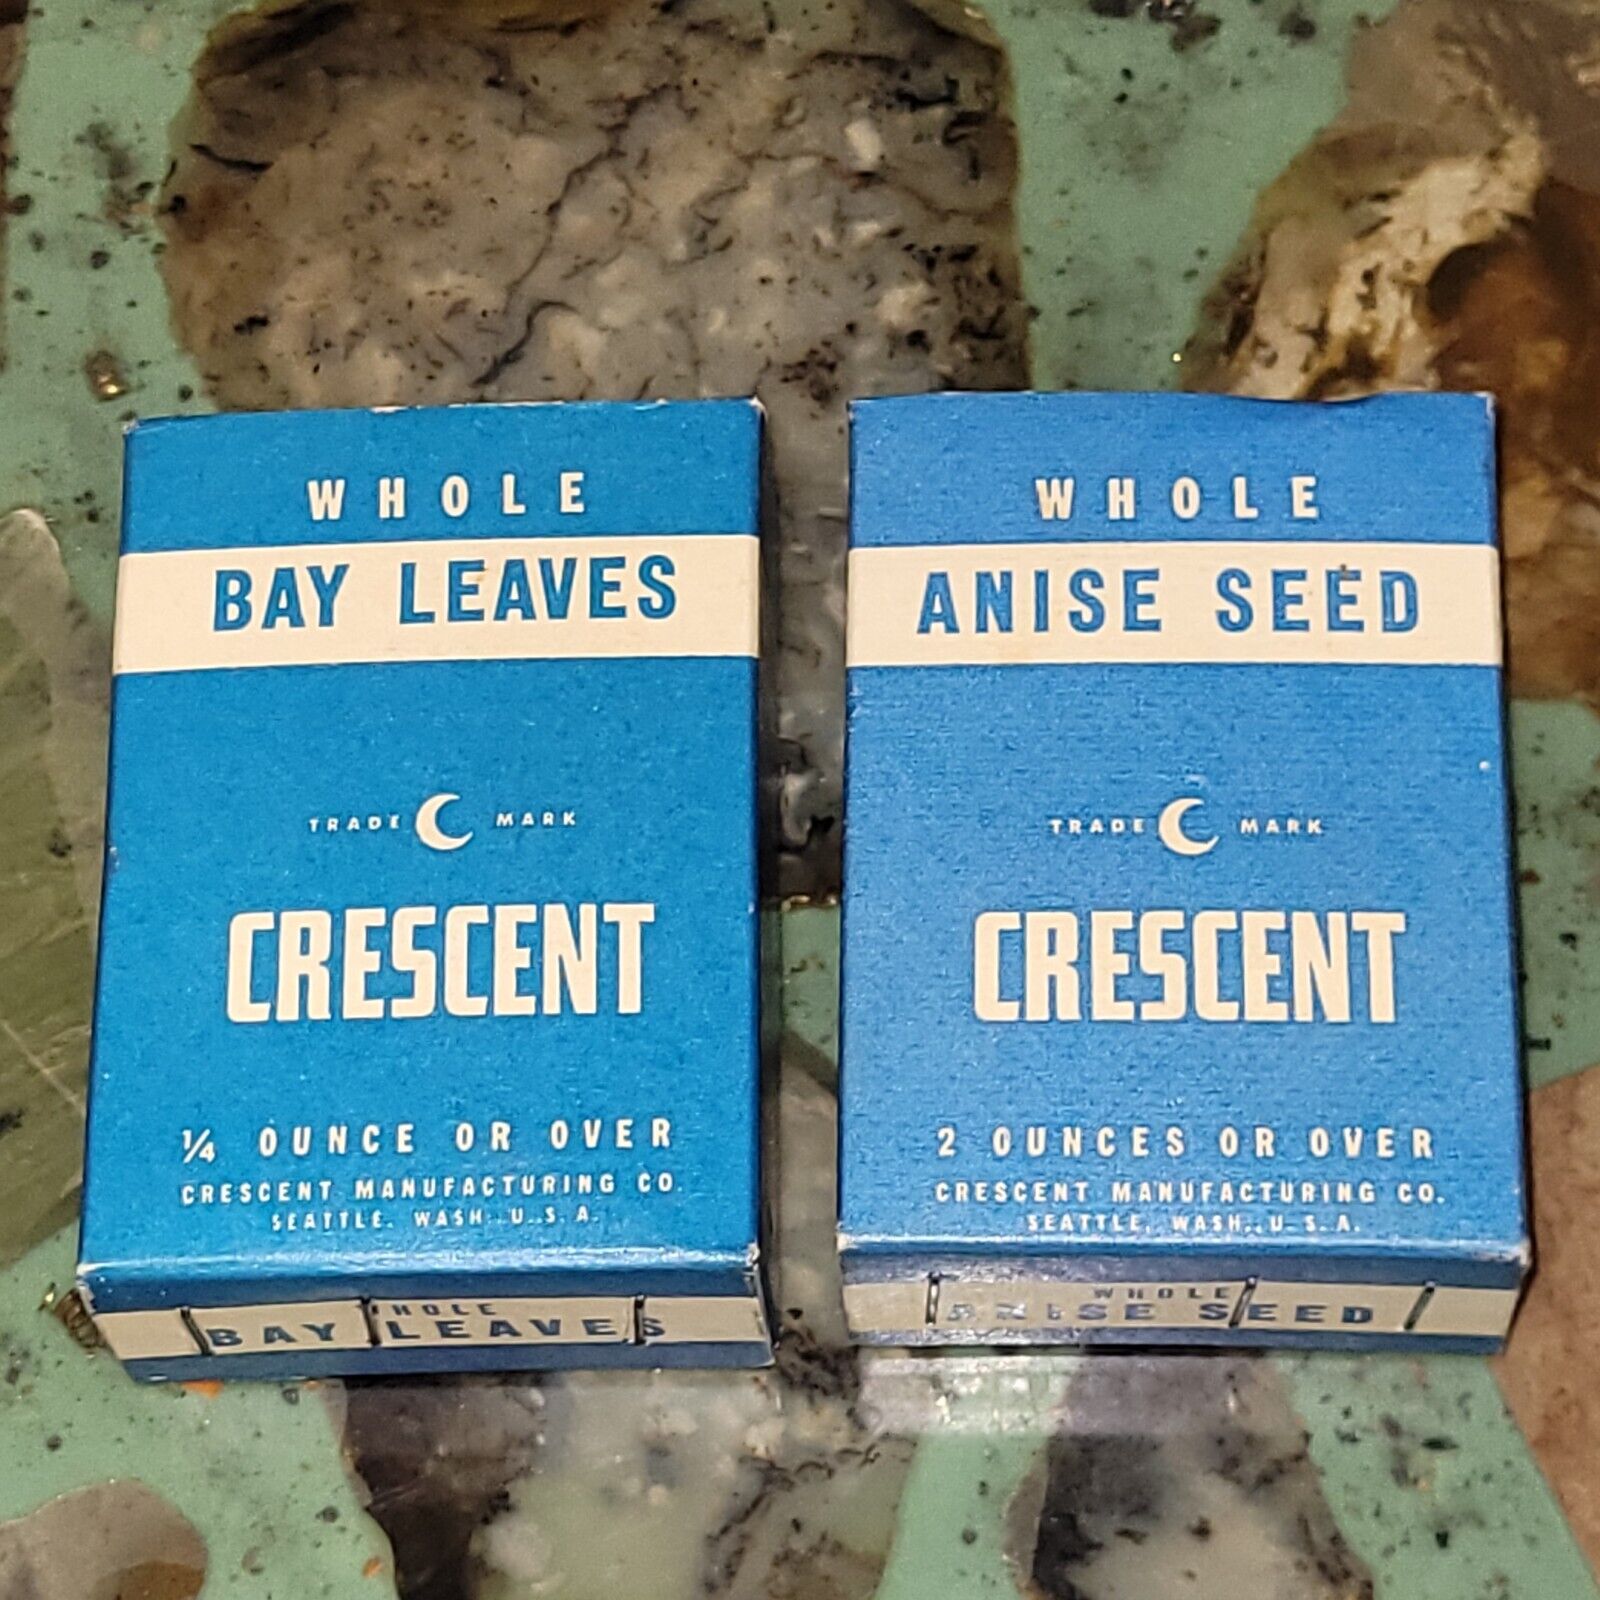 Lot of 2 NOS Vintage CRESCENT SPICE Boxes WHOLE ANISE SEED & WHOLE BAY LEAVES